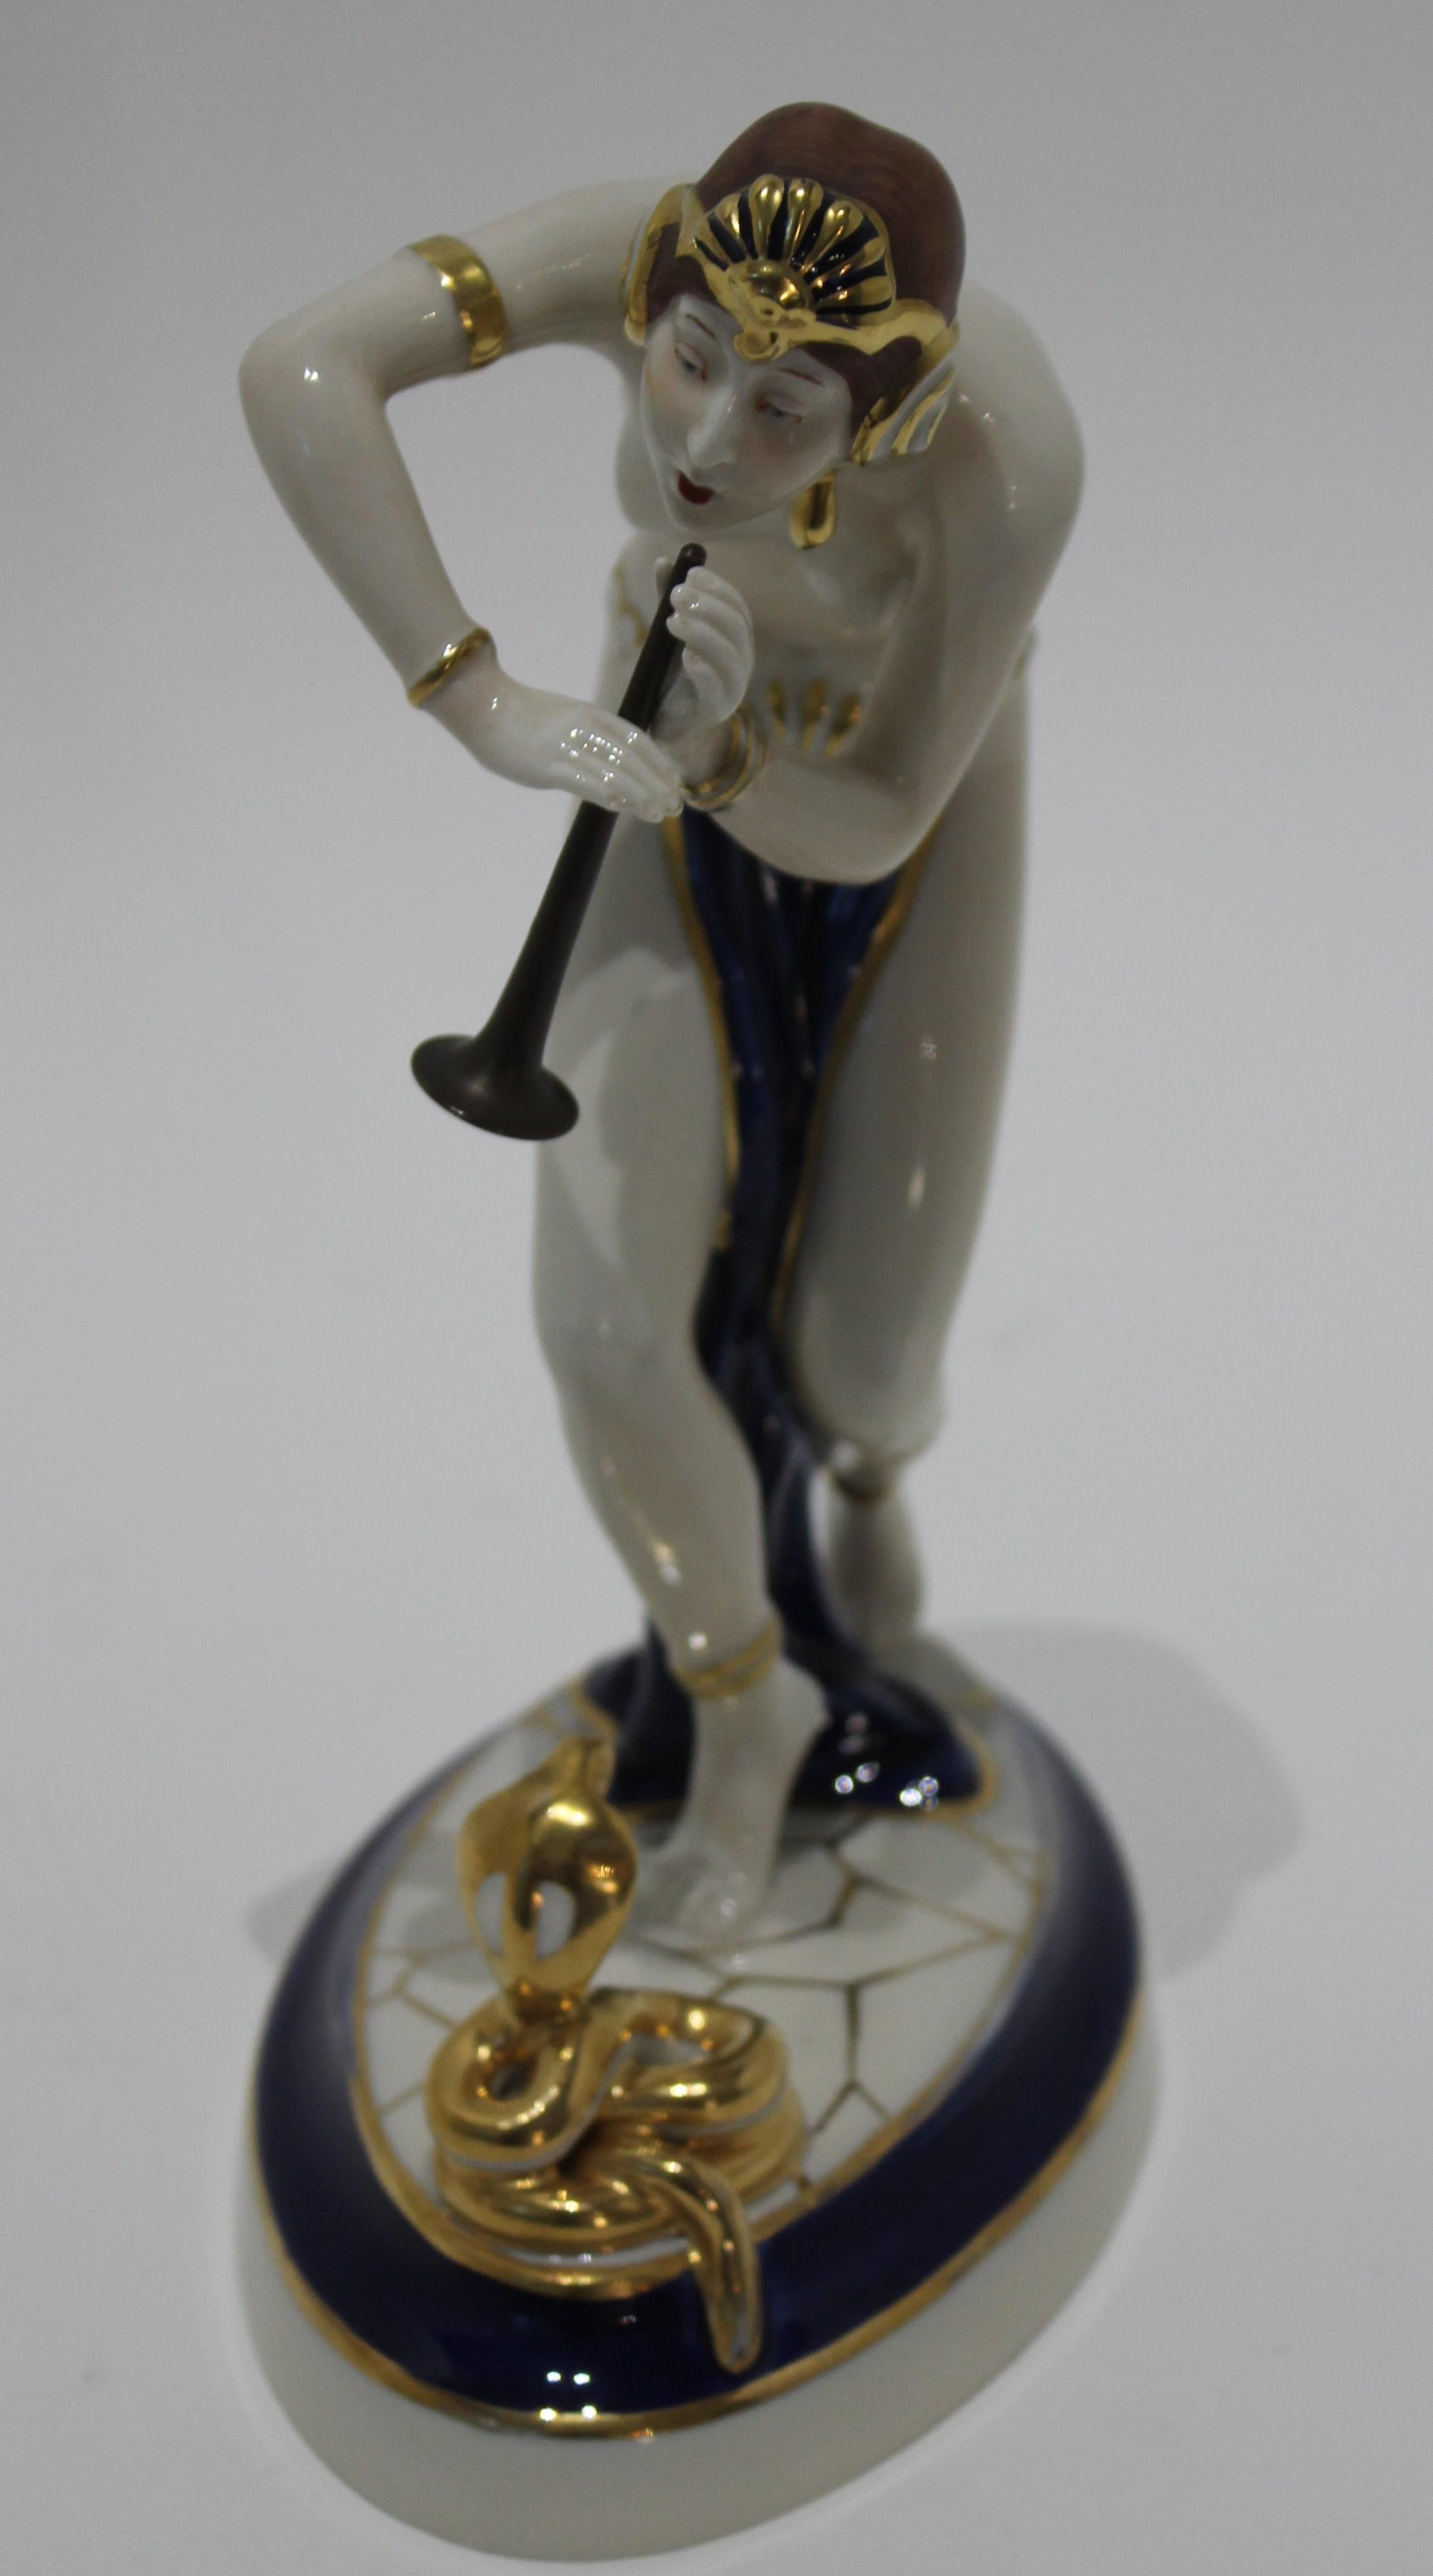 Porcelain Art Deco 1920s-1930s snake charmer figurine with old style horn royal Cux Czech tags signatures

Art Deco 1920s-30s snake charmer figurine with old style horn Royal Dux Czech tags signatures from a Palm Beach estate. This is more refined